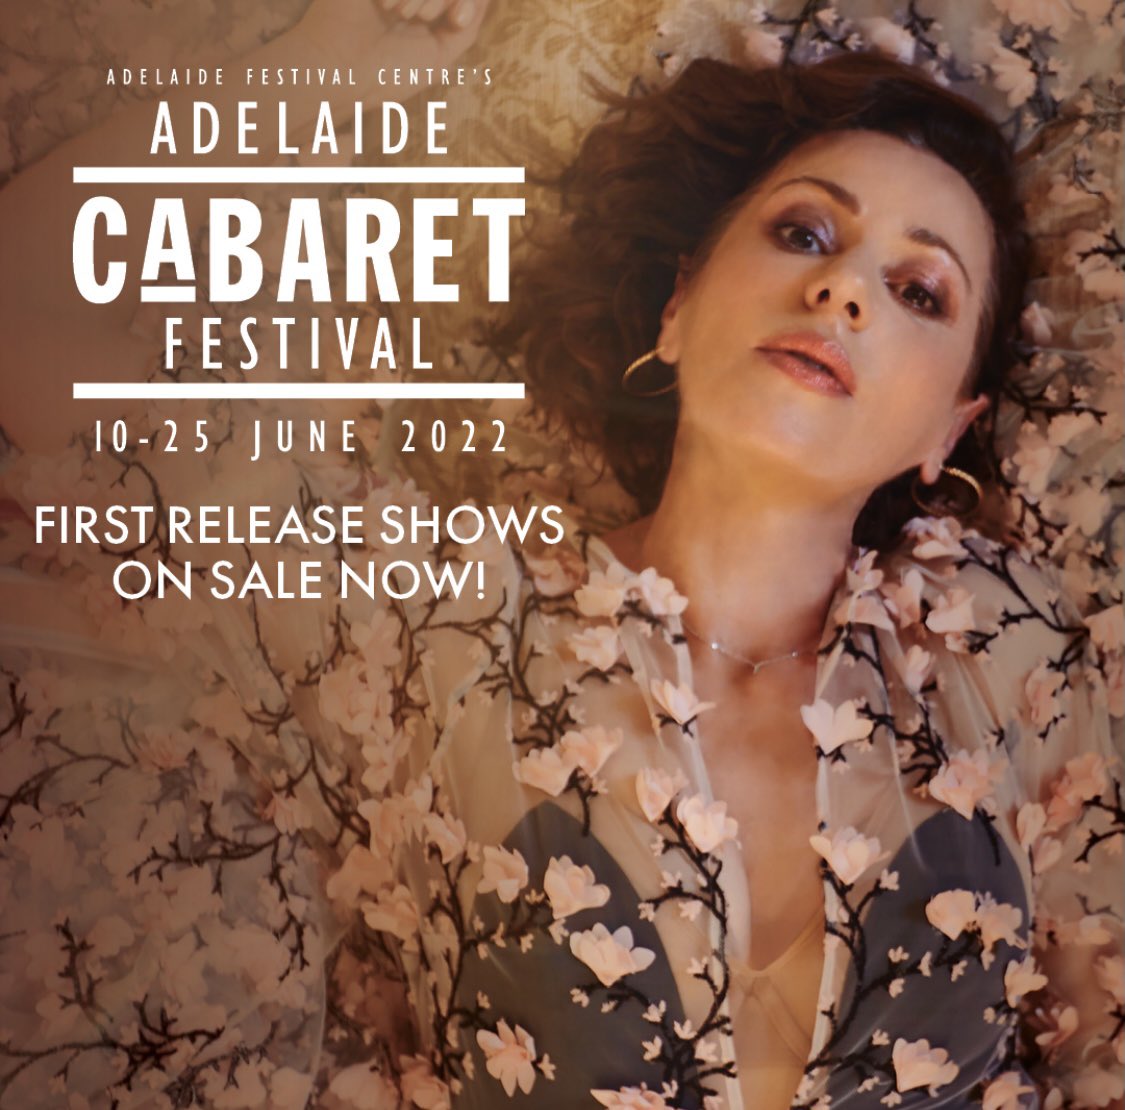 So excited and can’t wait to see you all at the Adelaide Cabaret Festival next year. Tickets on sale at 11am today adelaidecabaretfestival.com.au or premier.ticketek.com.au #clicklinkinbio